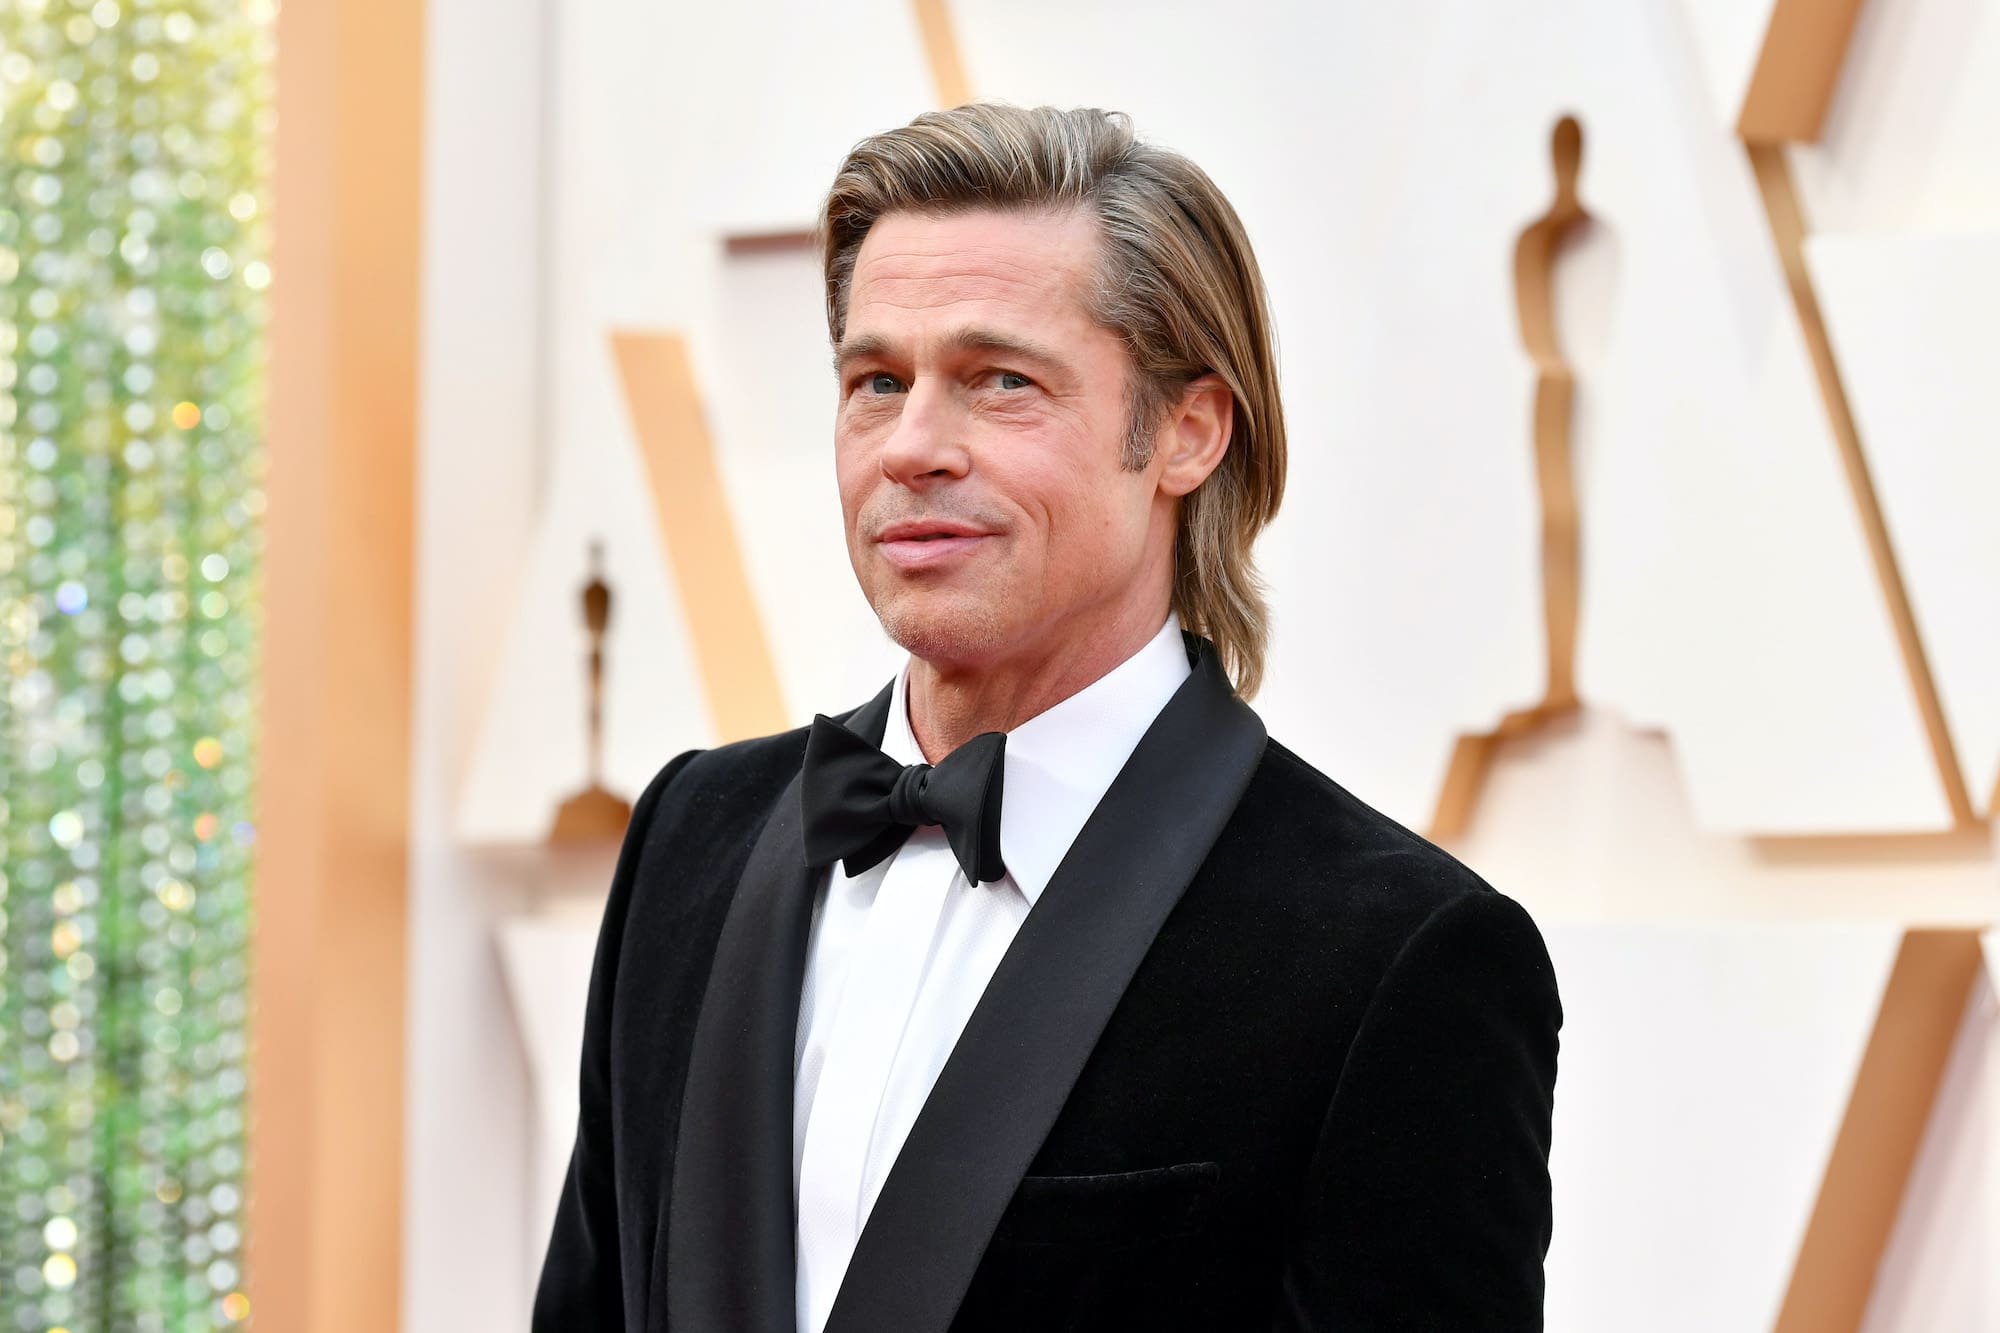 Brad Pitt, Star Of 'Bullet Train', Seen In Paris Getting Colorful And Fans Love It